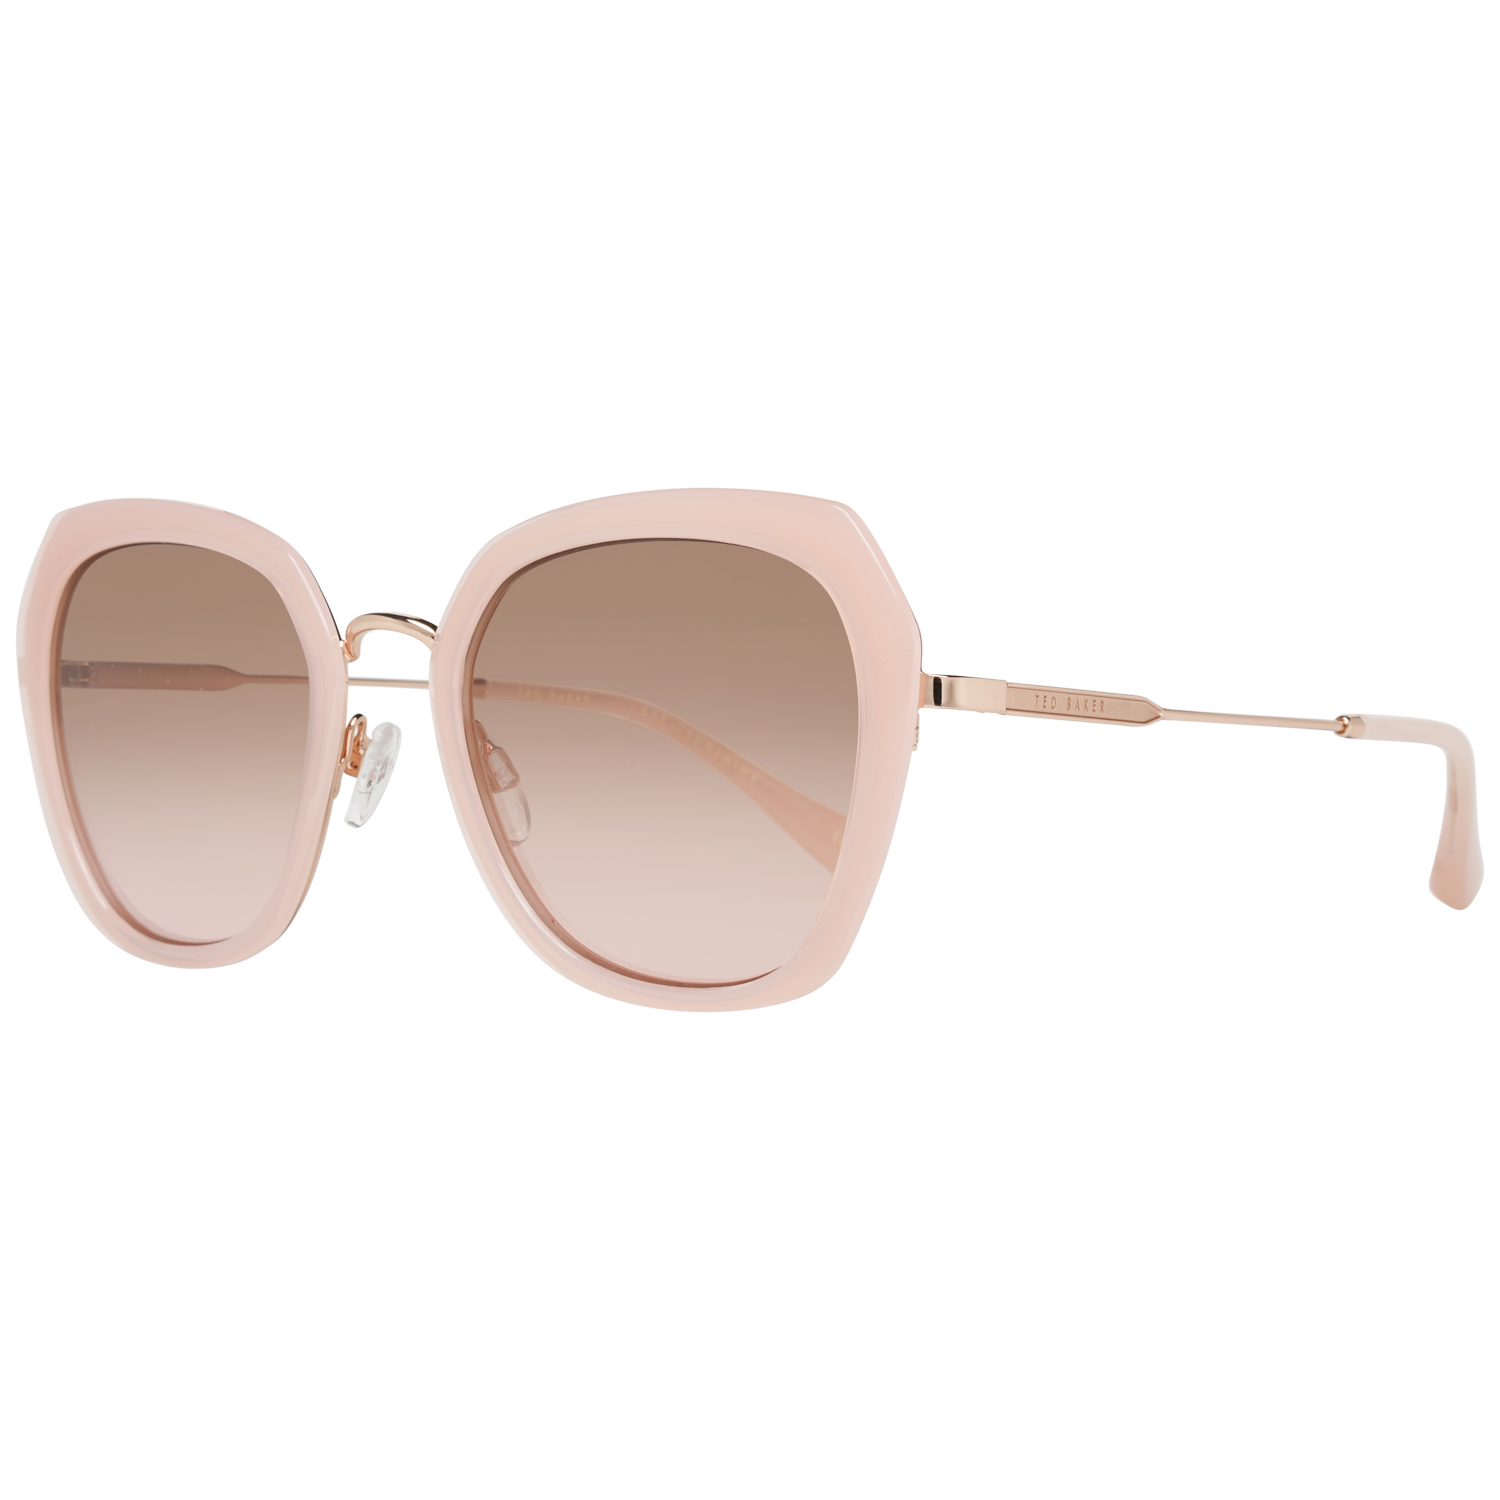 Ted Baker Sunglasses TB1581 215 53 Pink